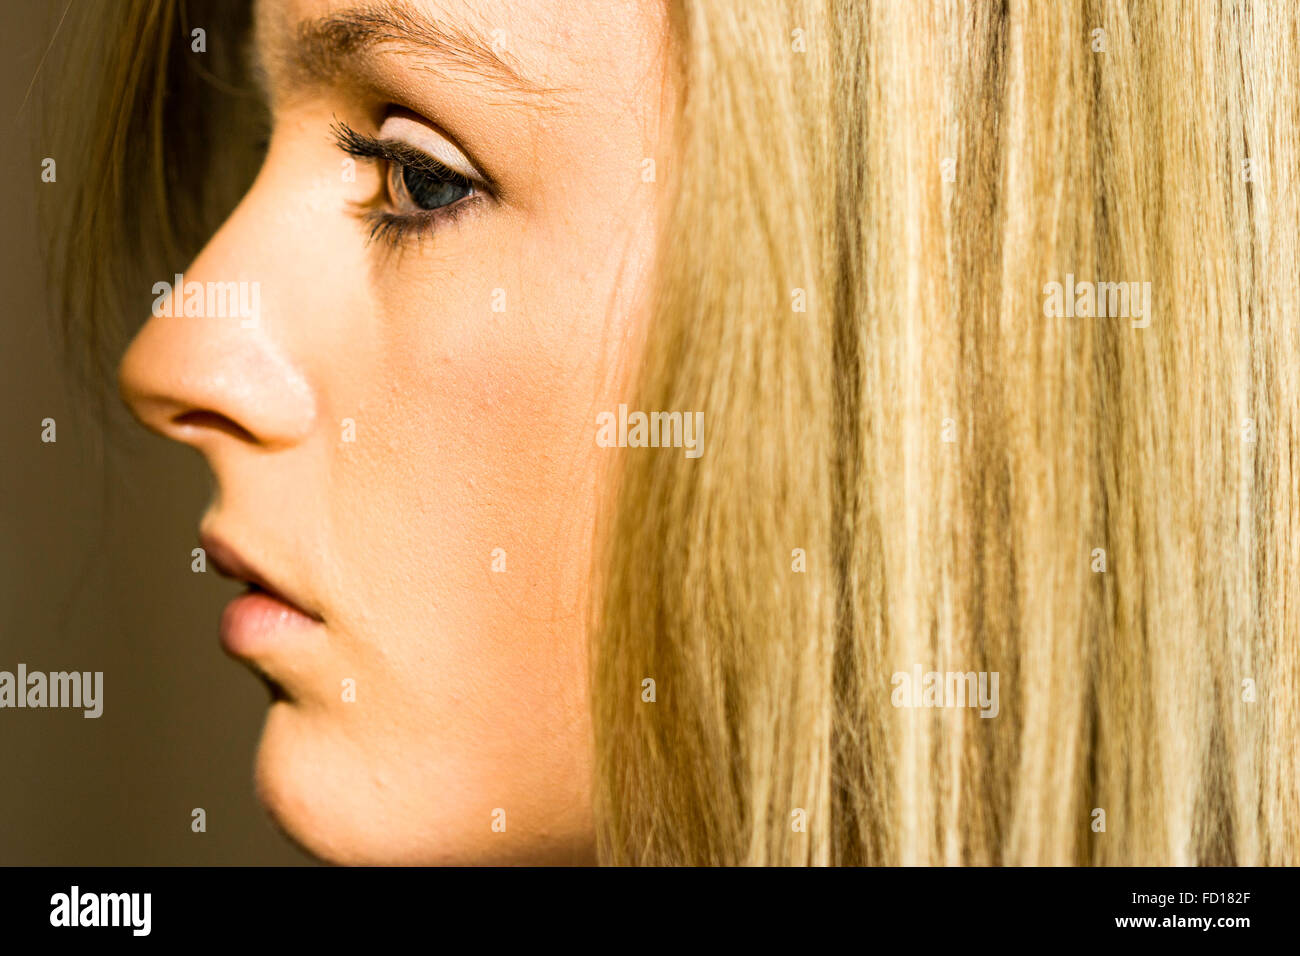 Caucasian teenage girl with blue eyes. Close up of face, side profile. Annoyed angry expression, long blonde straight hair. Focus on eye. Stock Photo